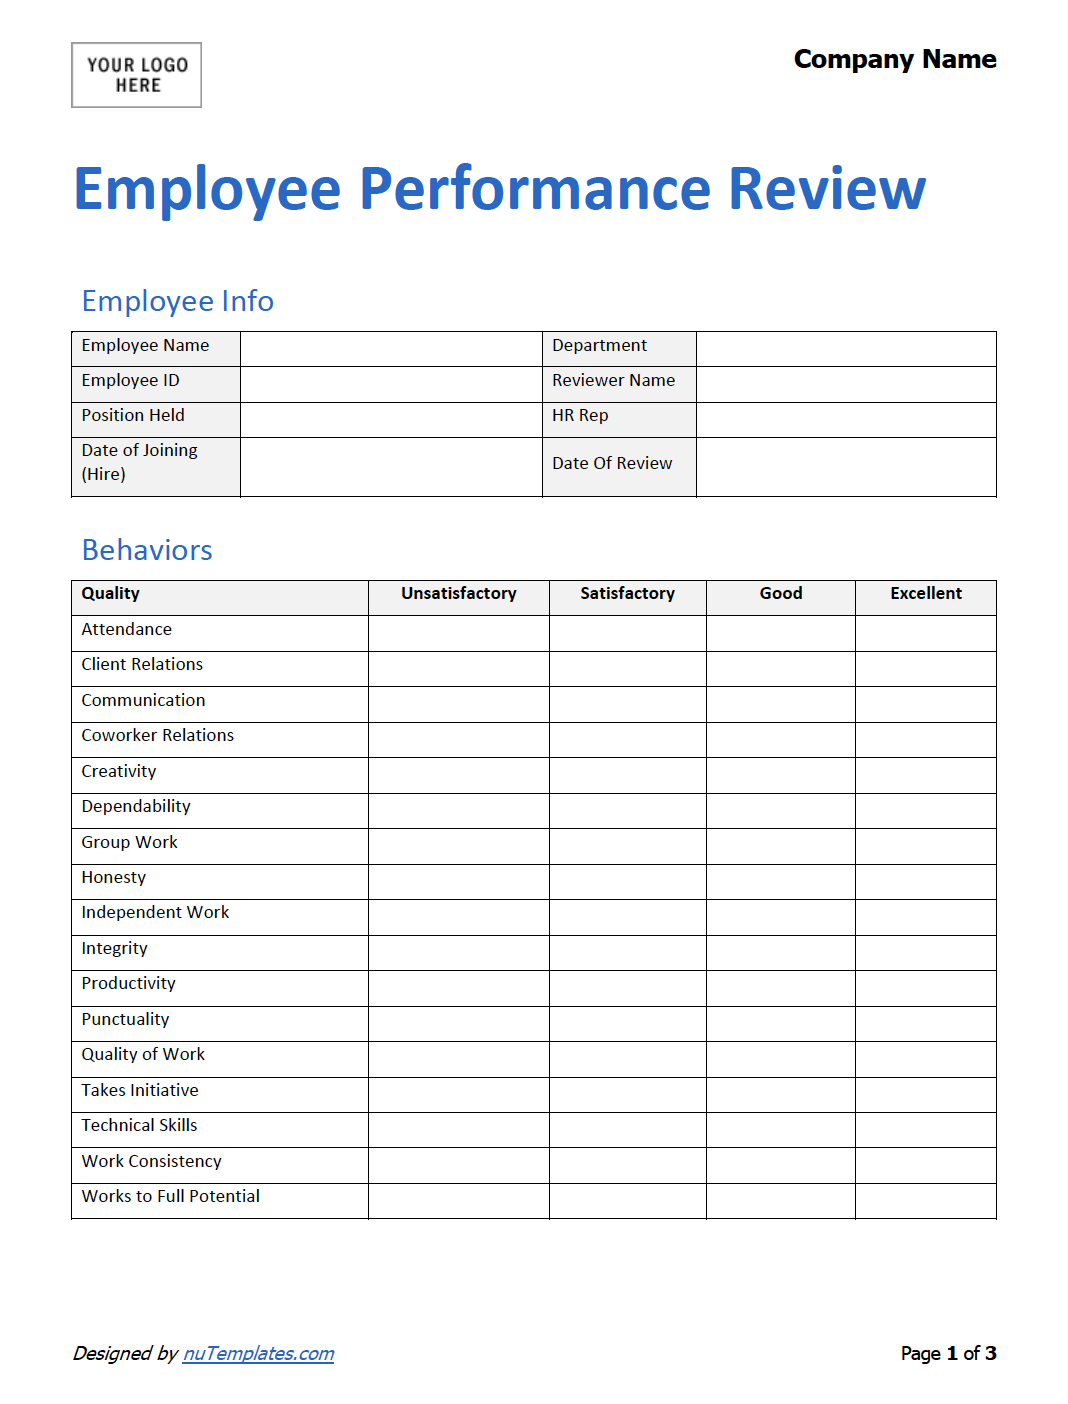 employee-performance-review-template